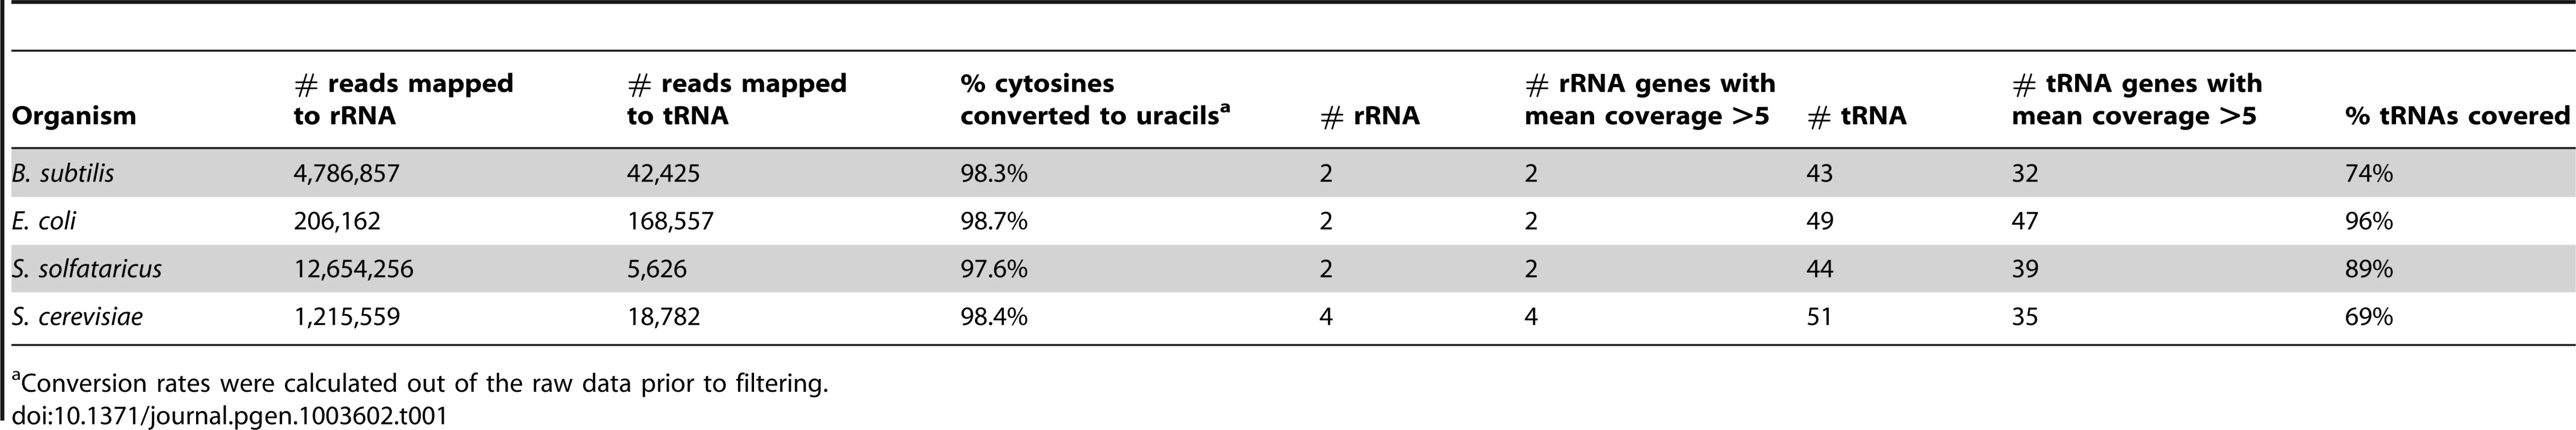 Sequencing reads covering rRNAs and tRNAs in the studied organisms.